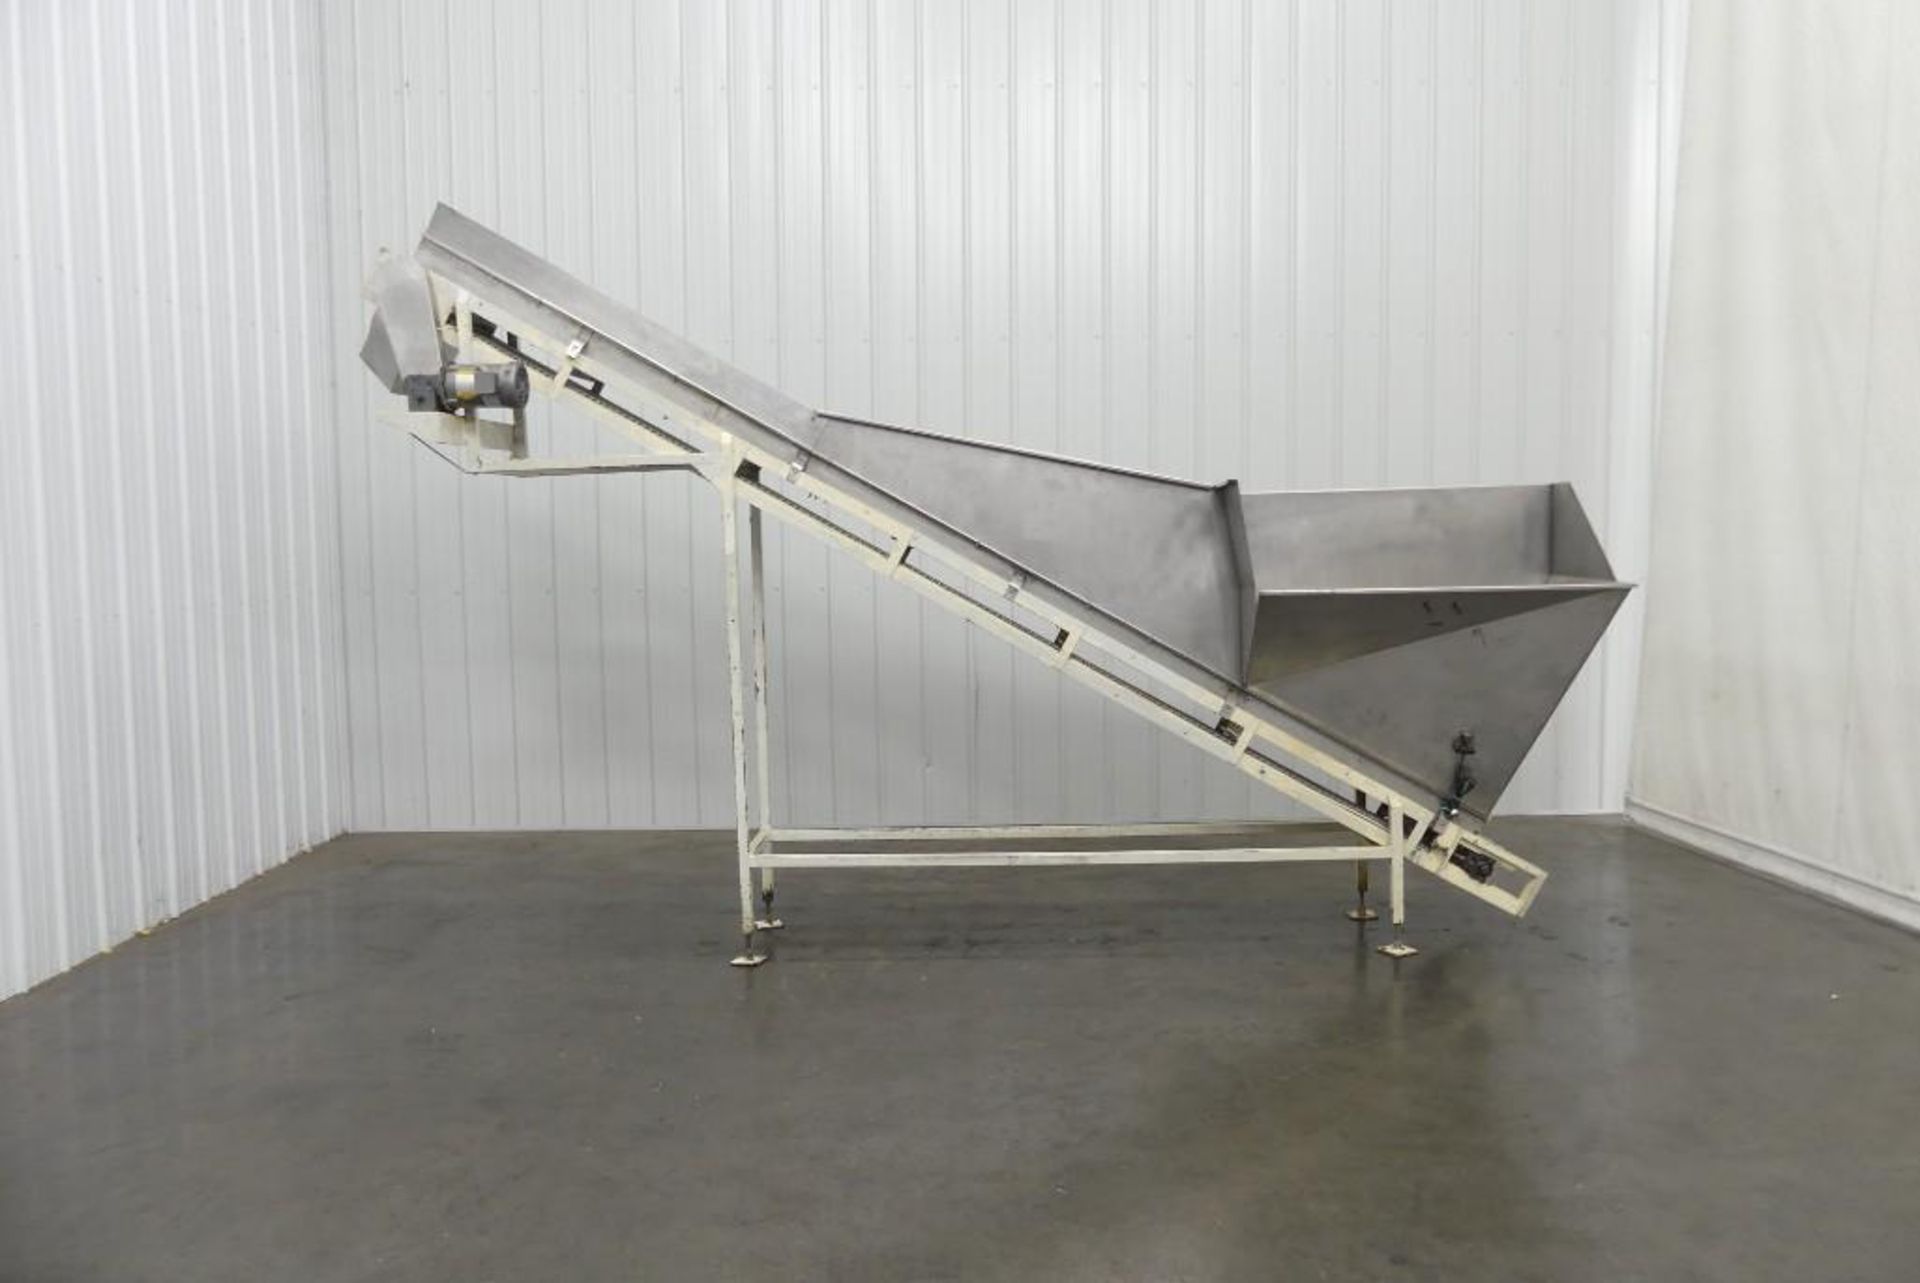 Cleated Incline Conveyor with Hopper 16" Wide